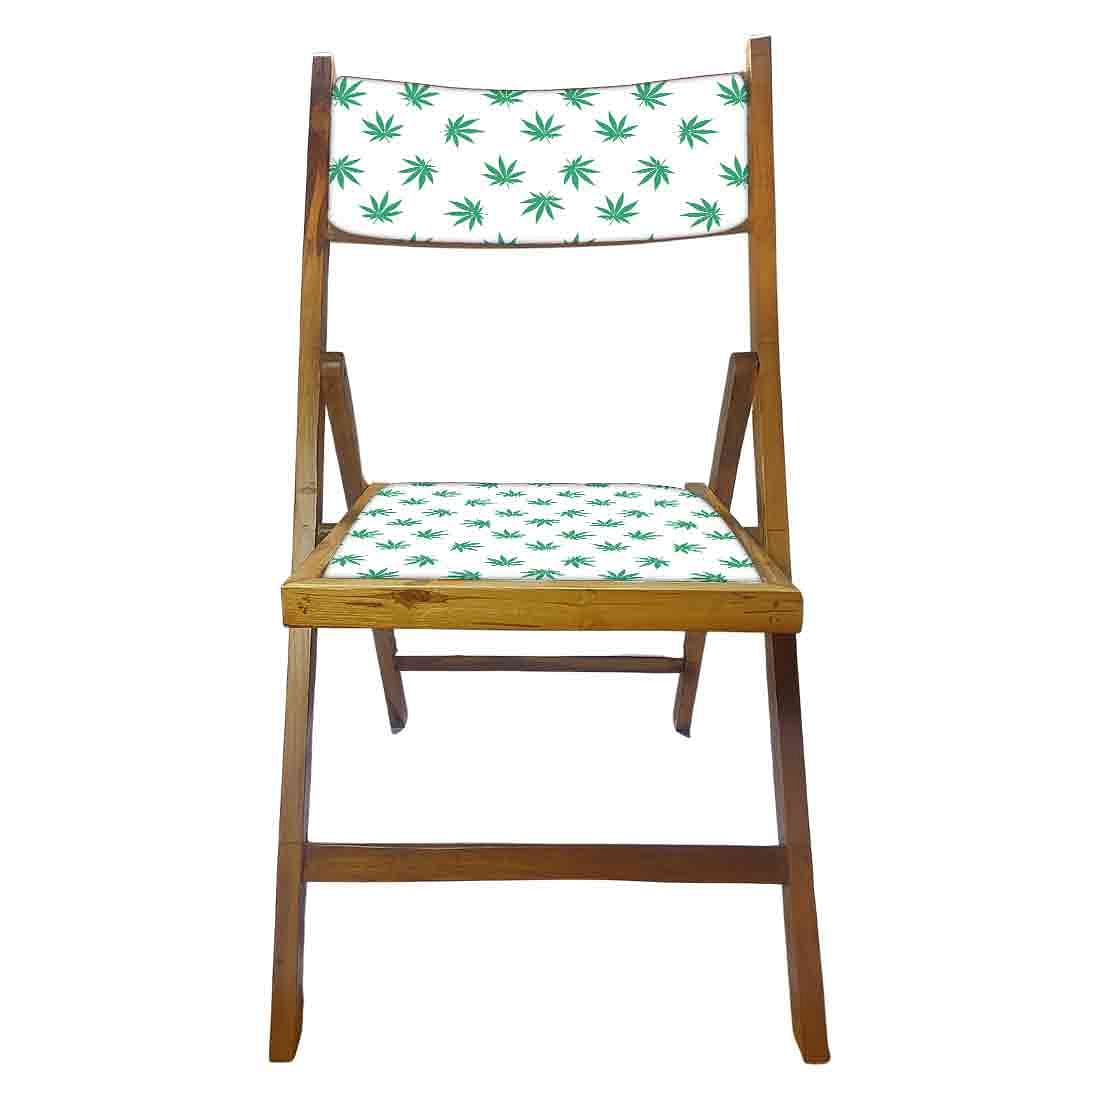 Nutcase Folding Wooden Chair For Dining  -  Baby Leaves Nutcase